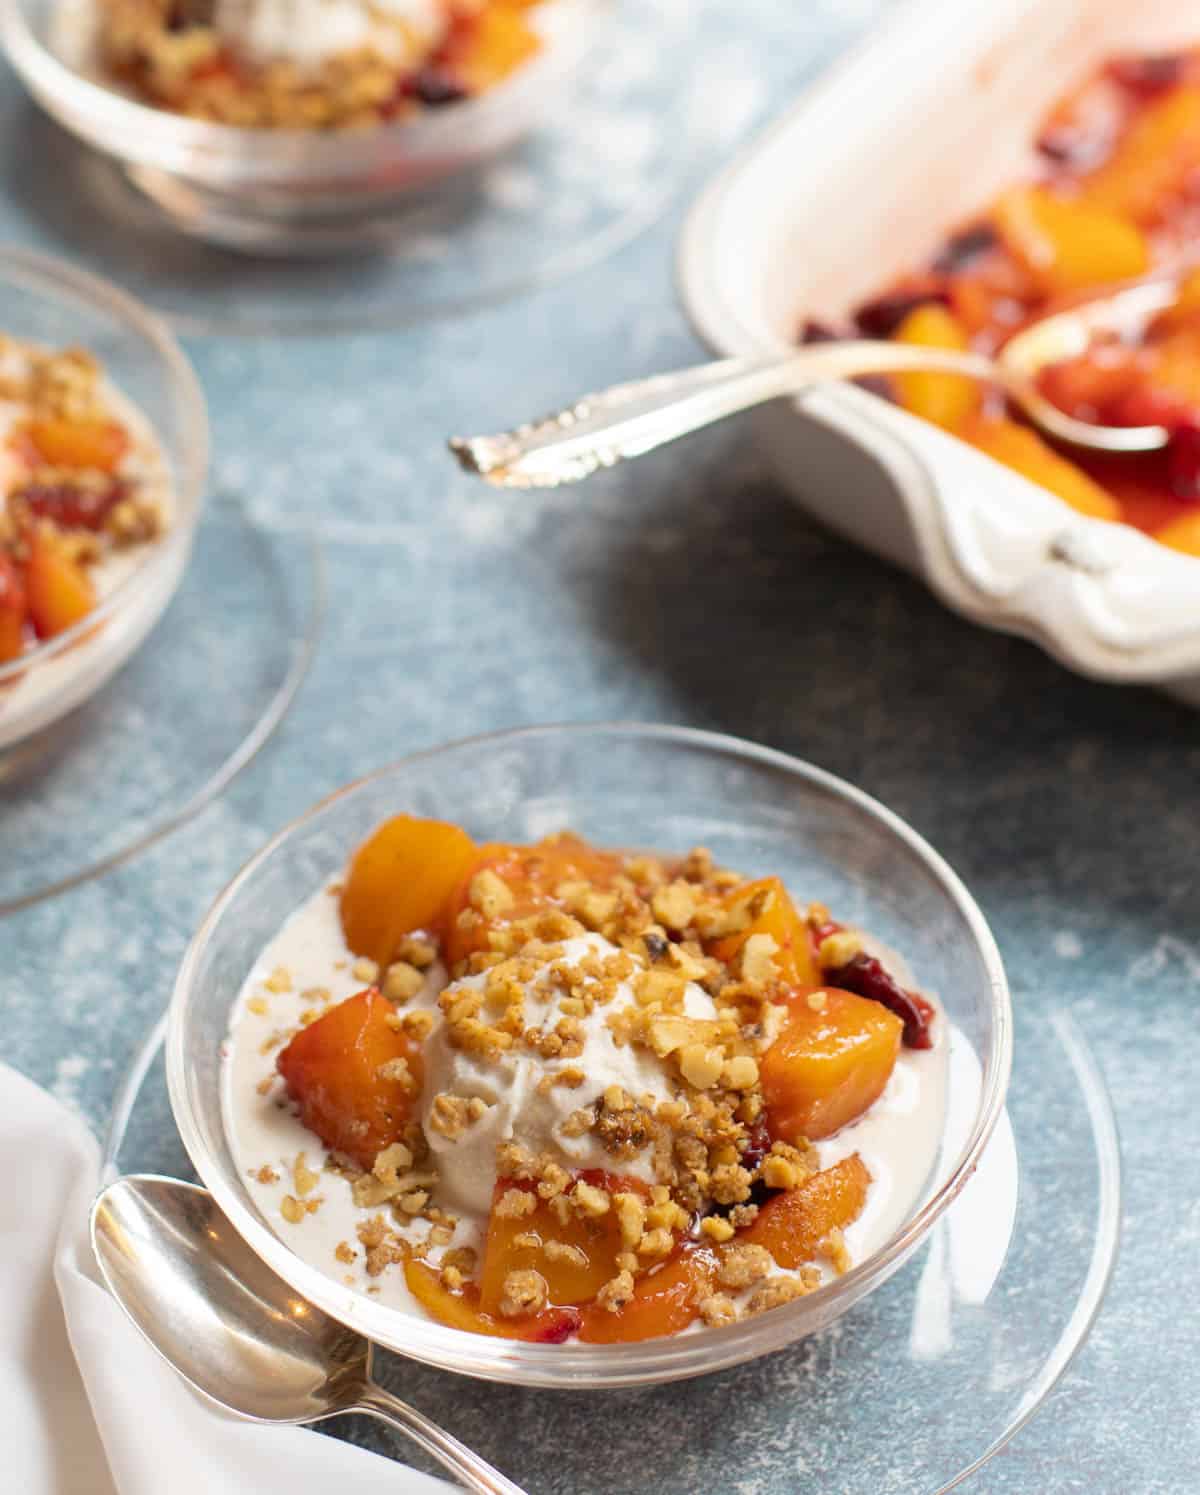 Roasted peaches, nectarines and plums over ice cream with candied walnuts